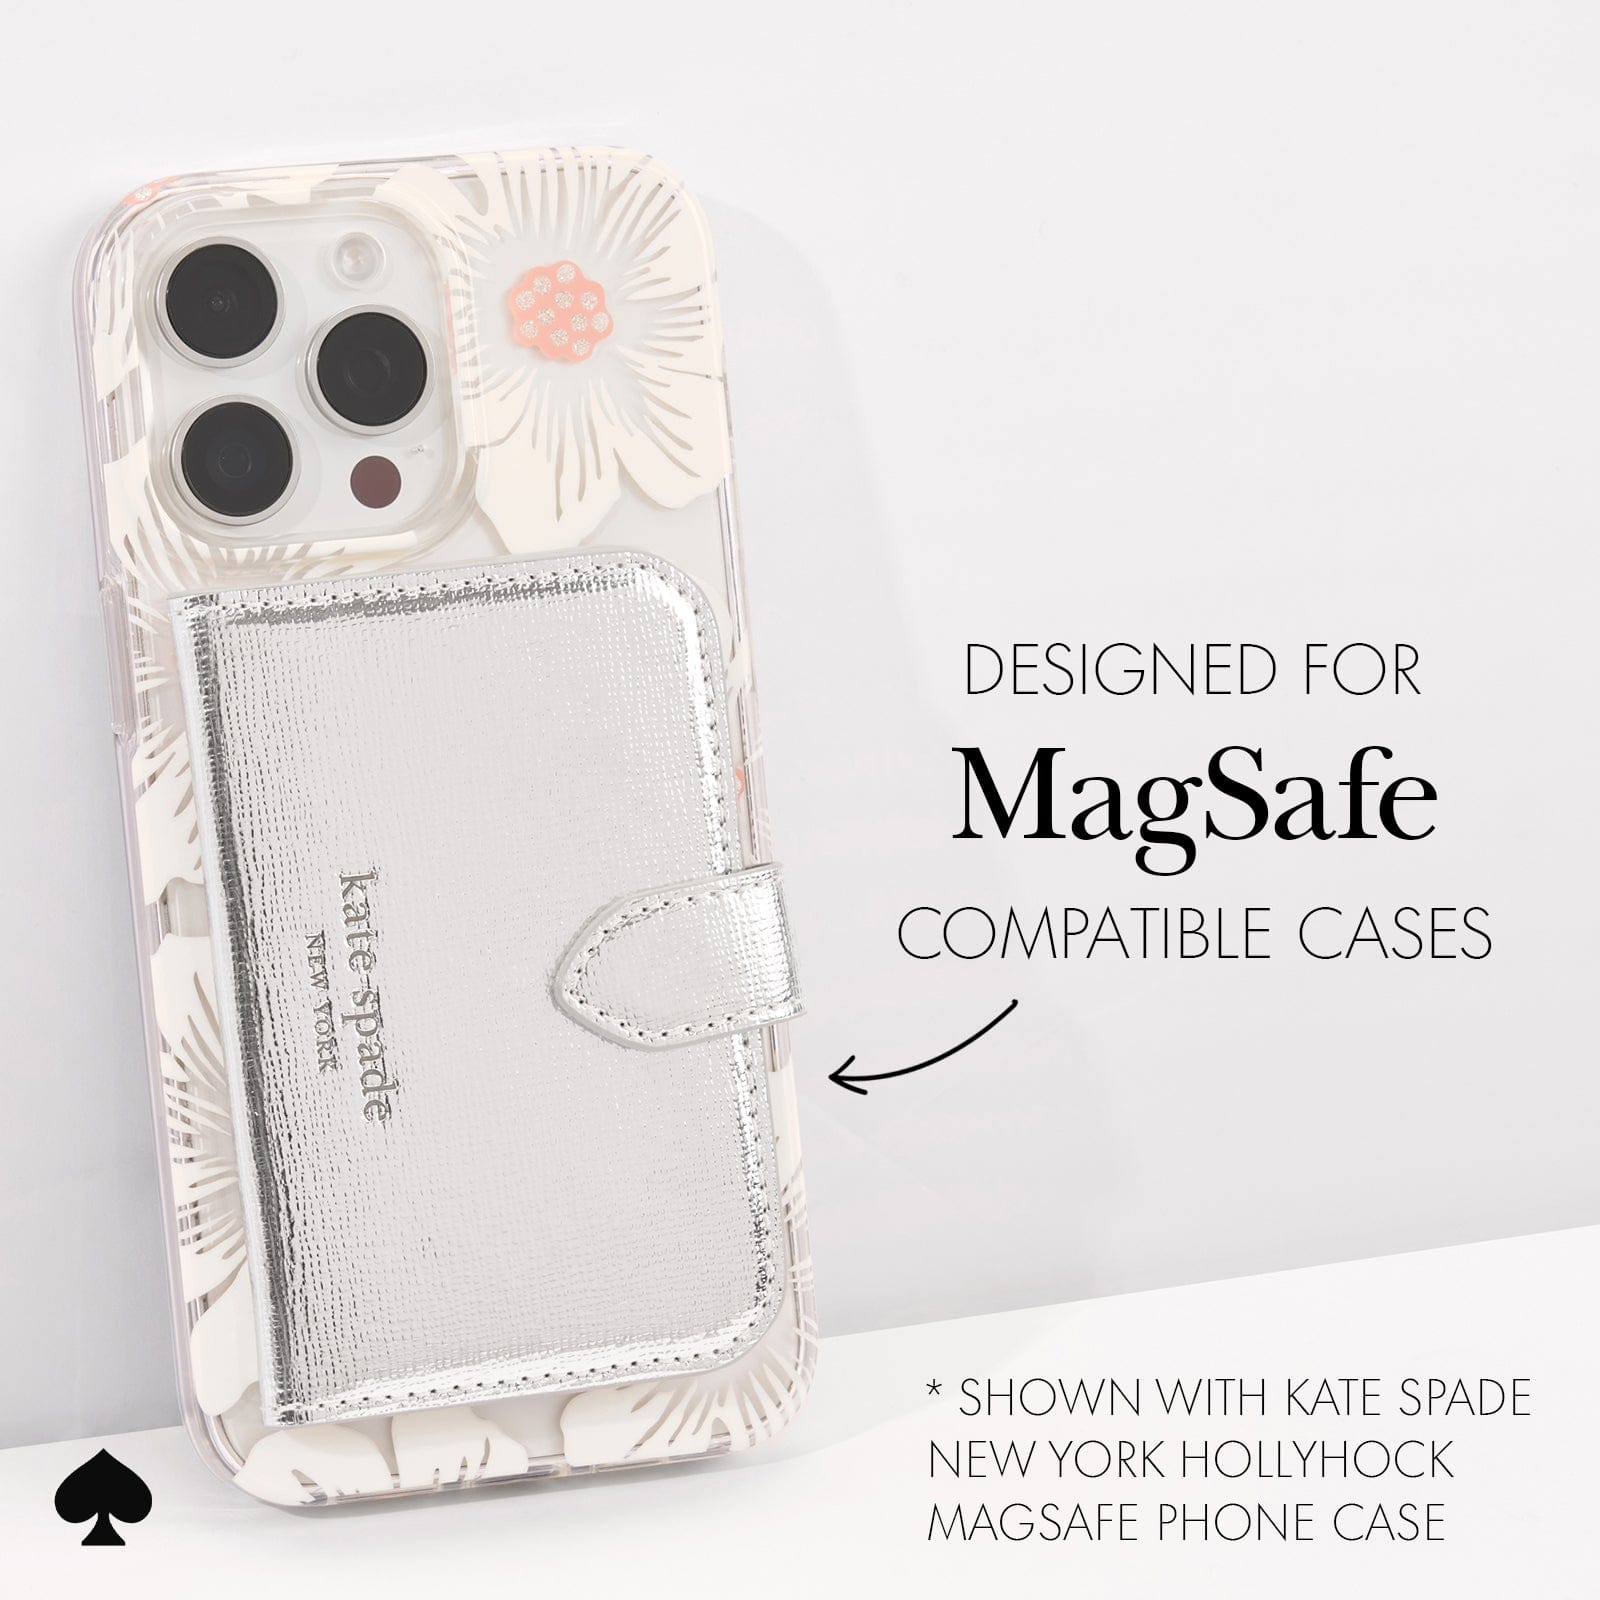 DESIGNED FOR MAGSAFE COMPATIBLE CASES. SHOWN WITH KATE SPADE NEW YORK HOLYHOCK MAGSAFE PHONE CASE